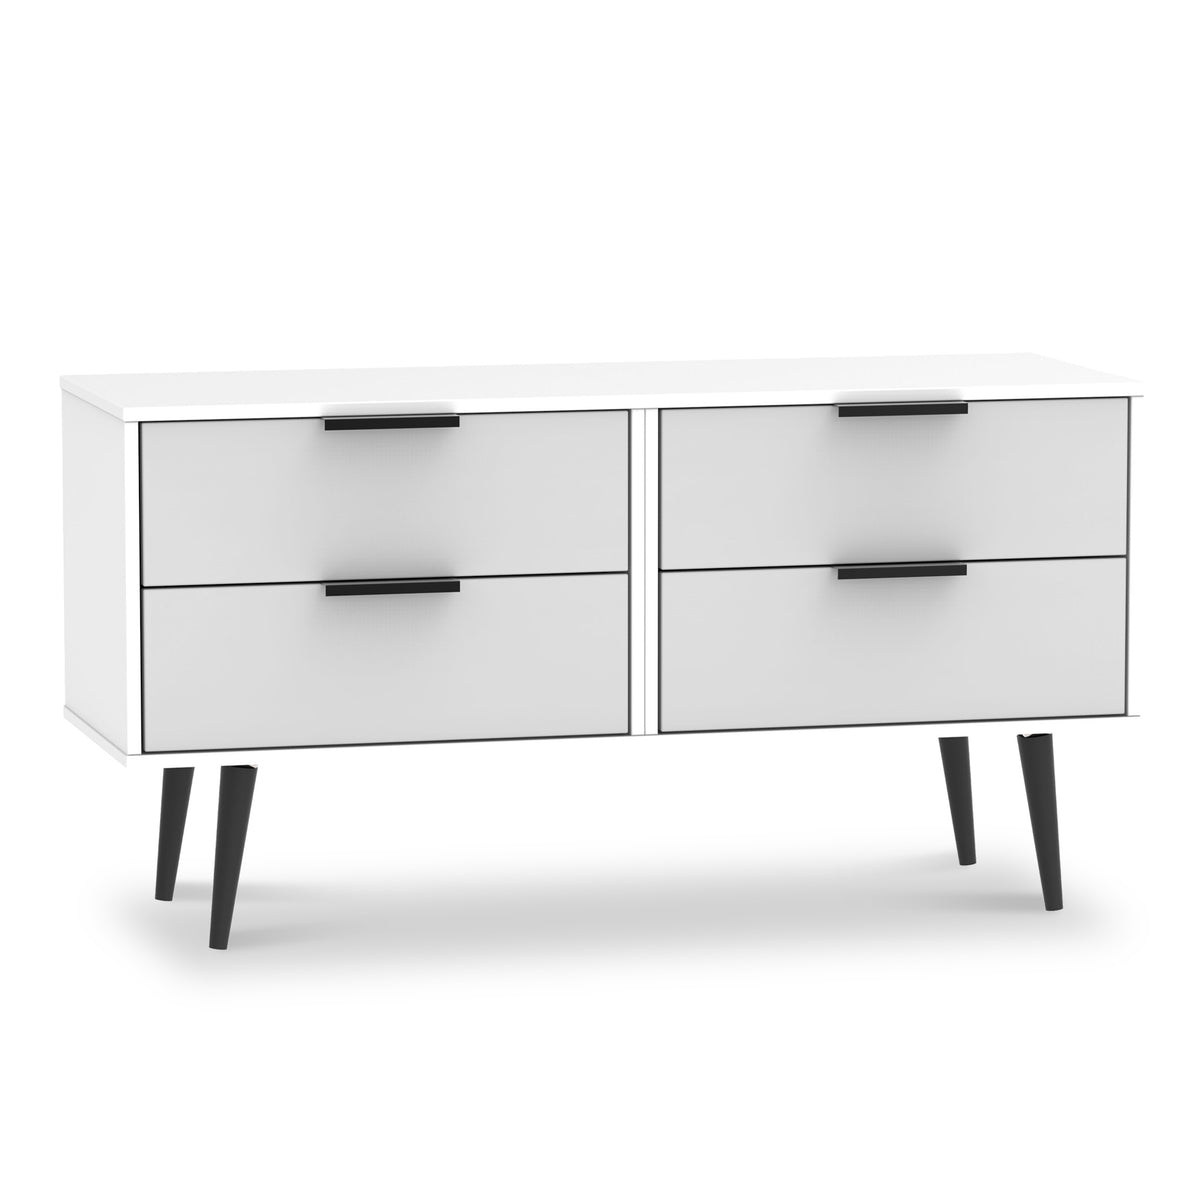 Asher White and Grey 4 Drawer Low Storage Chest from Roseland Furniture